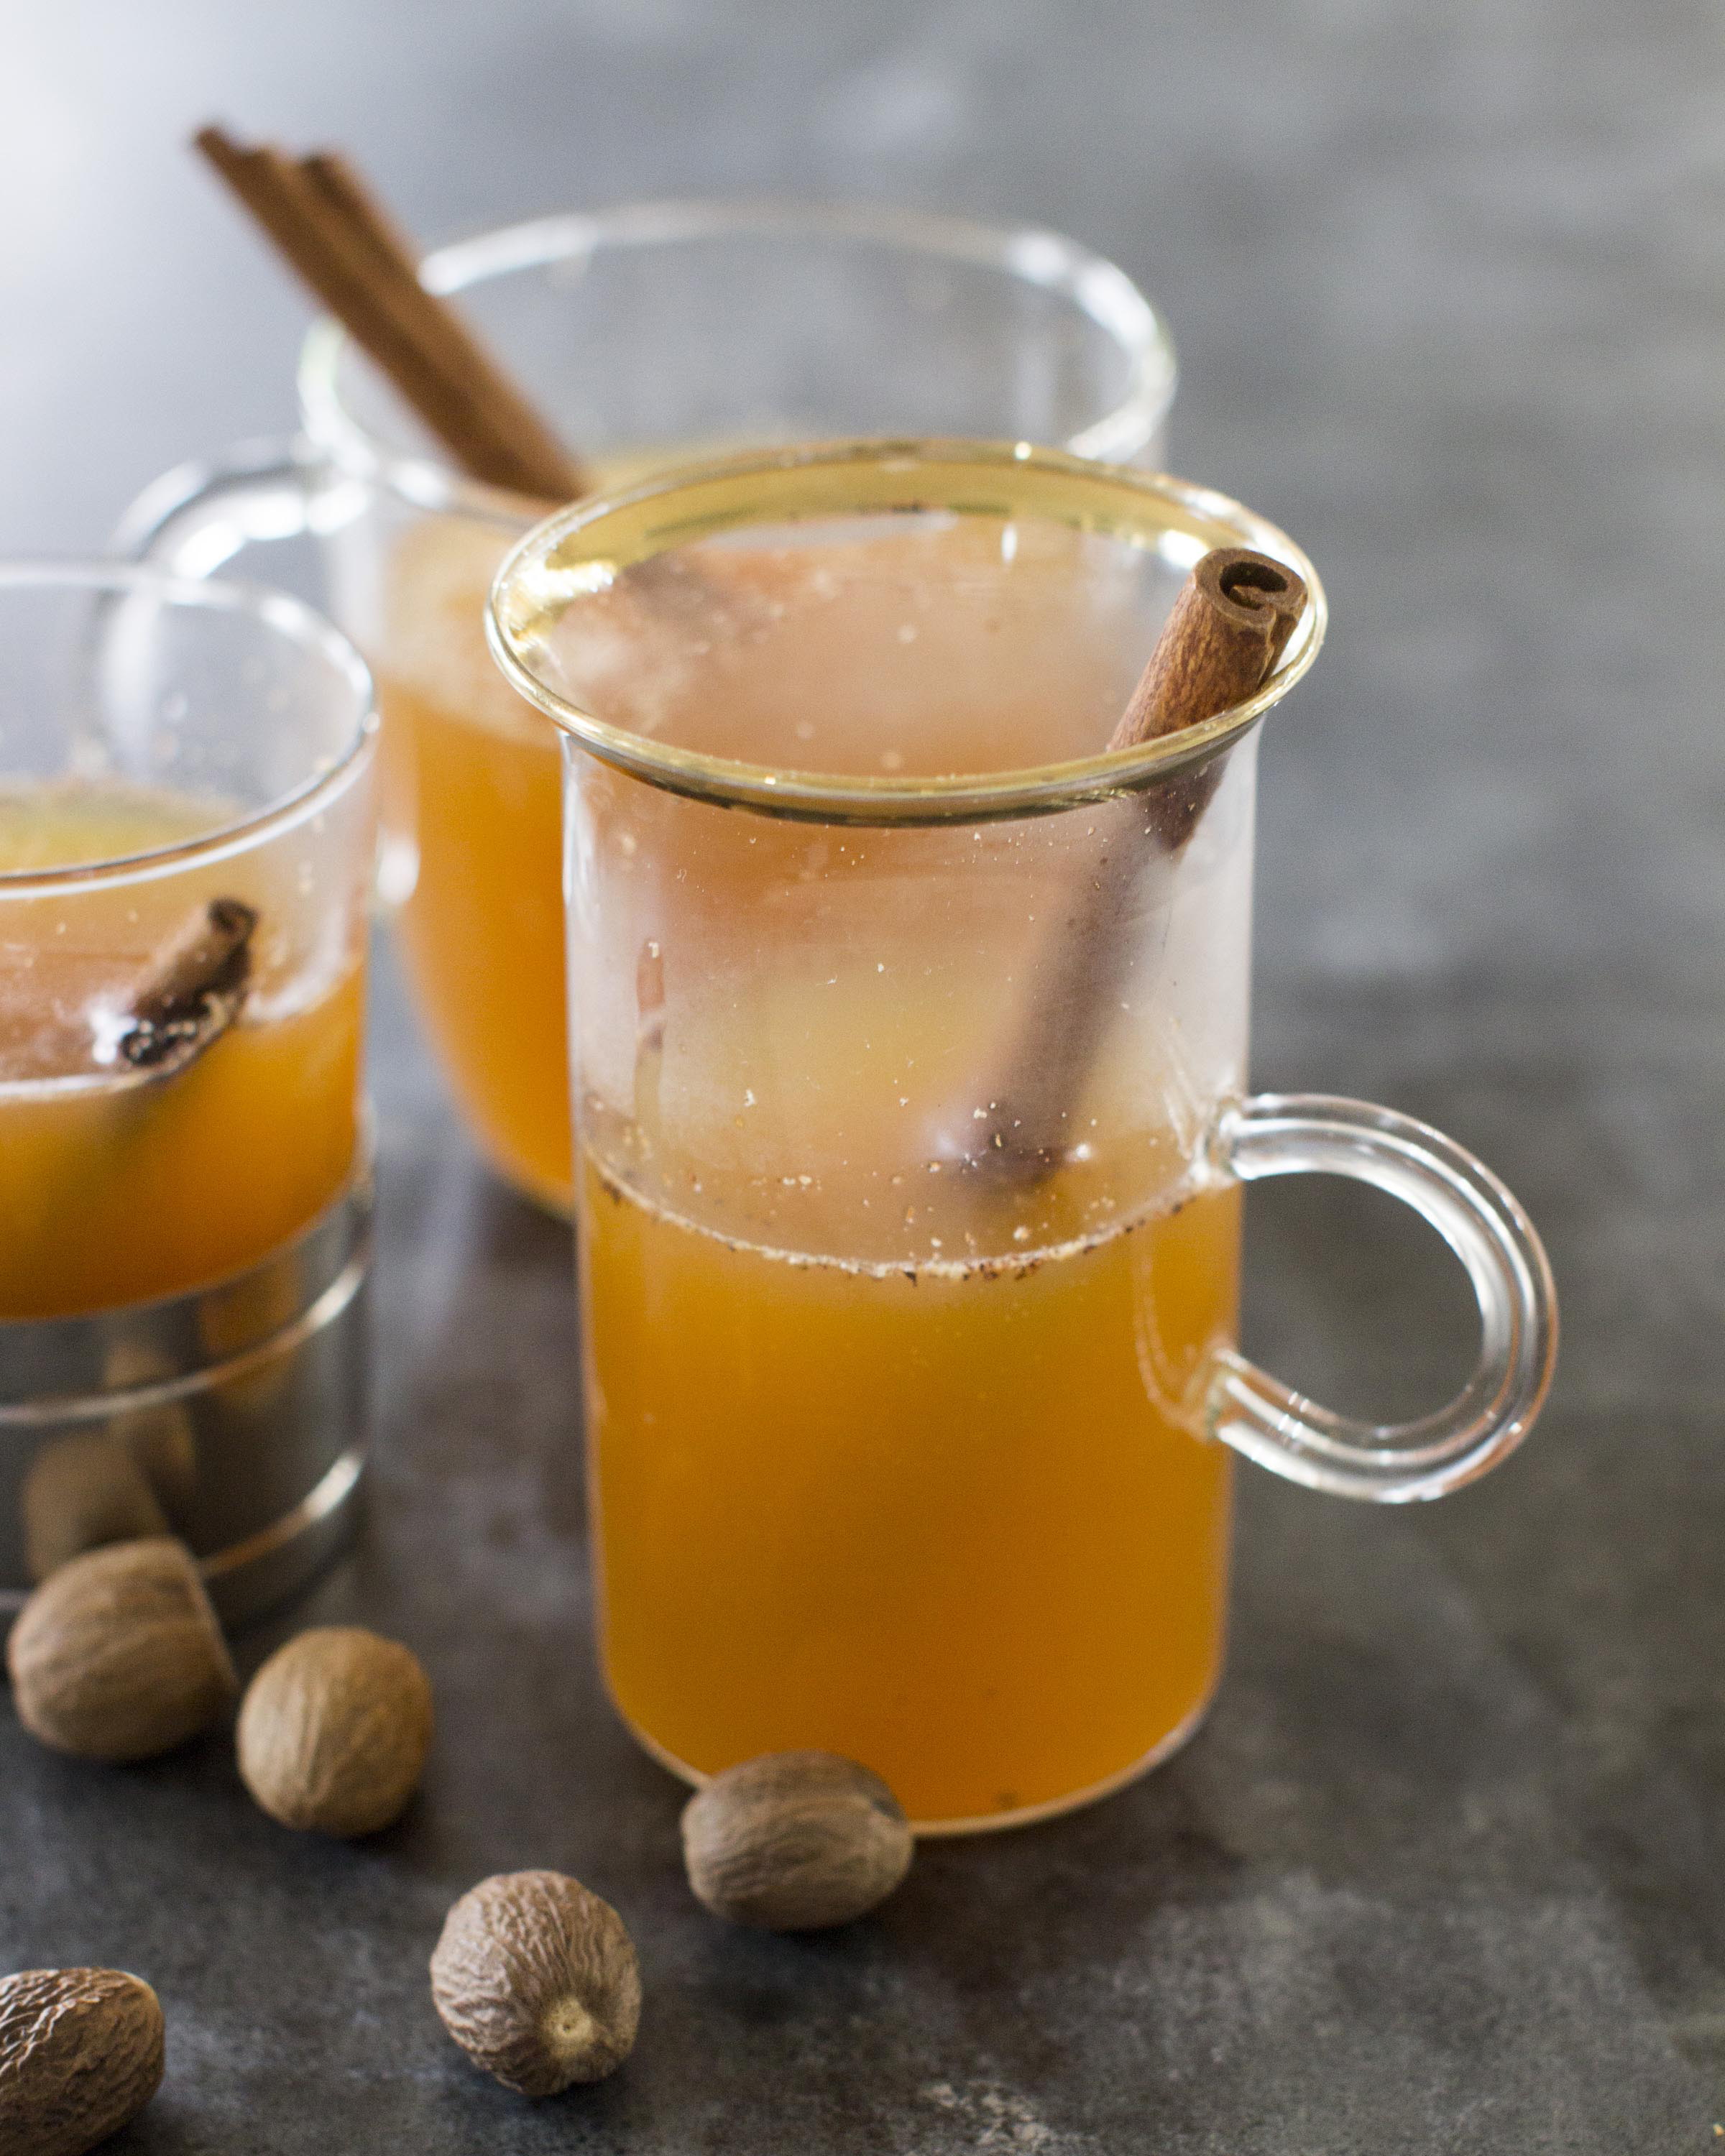 Roasted cider is a seasonal hot toddy that combines a classic mulled cider with the toasty flavor of hazelnuts.